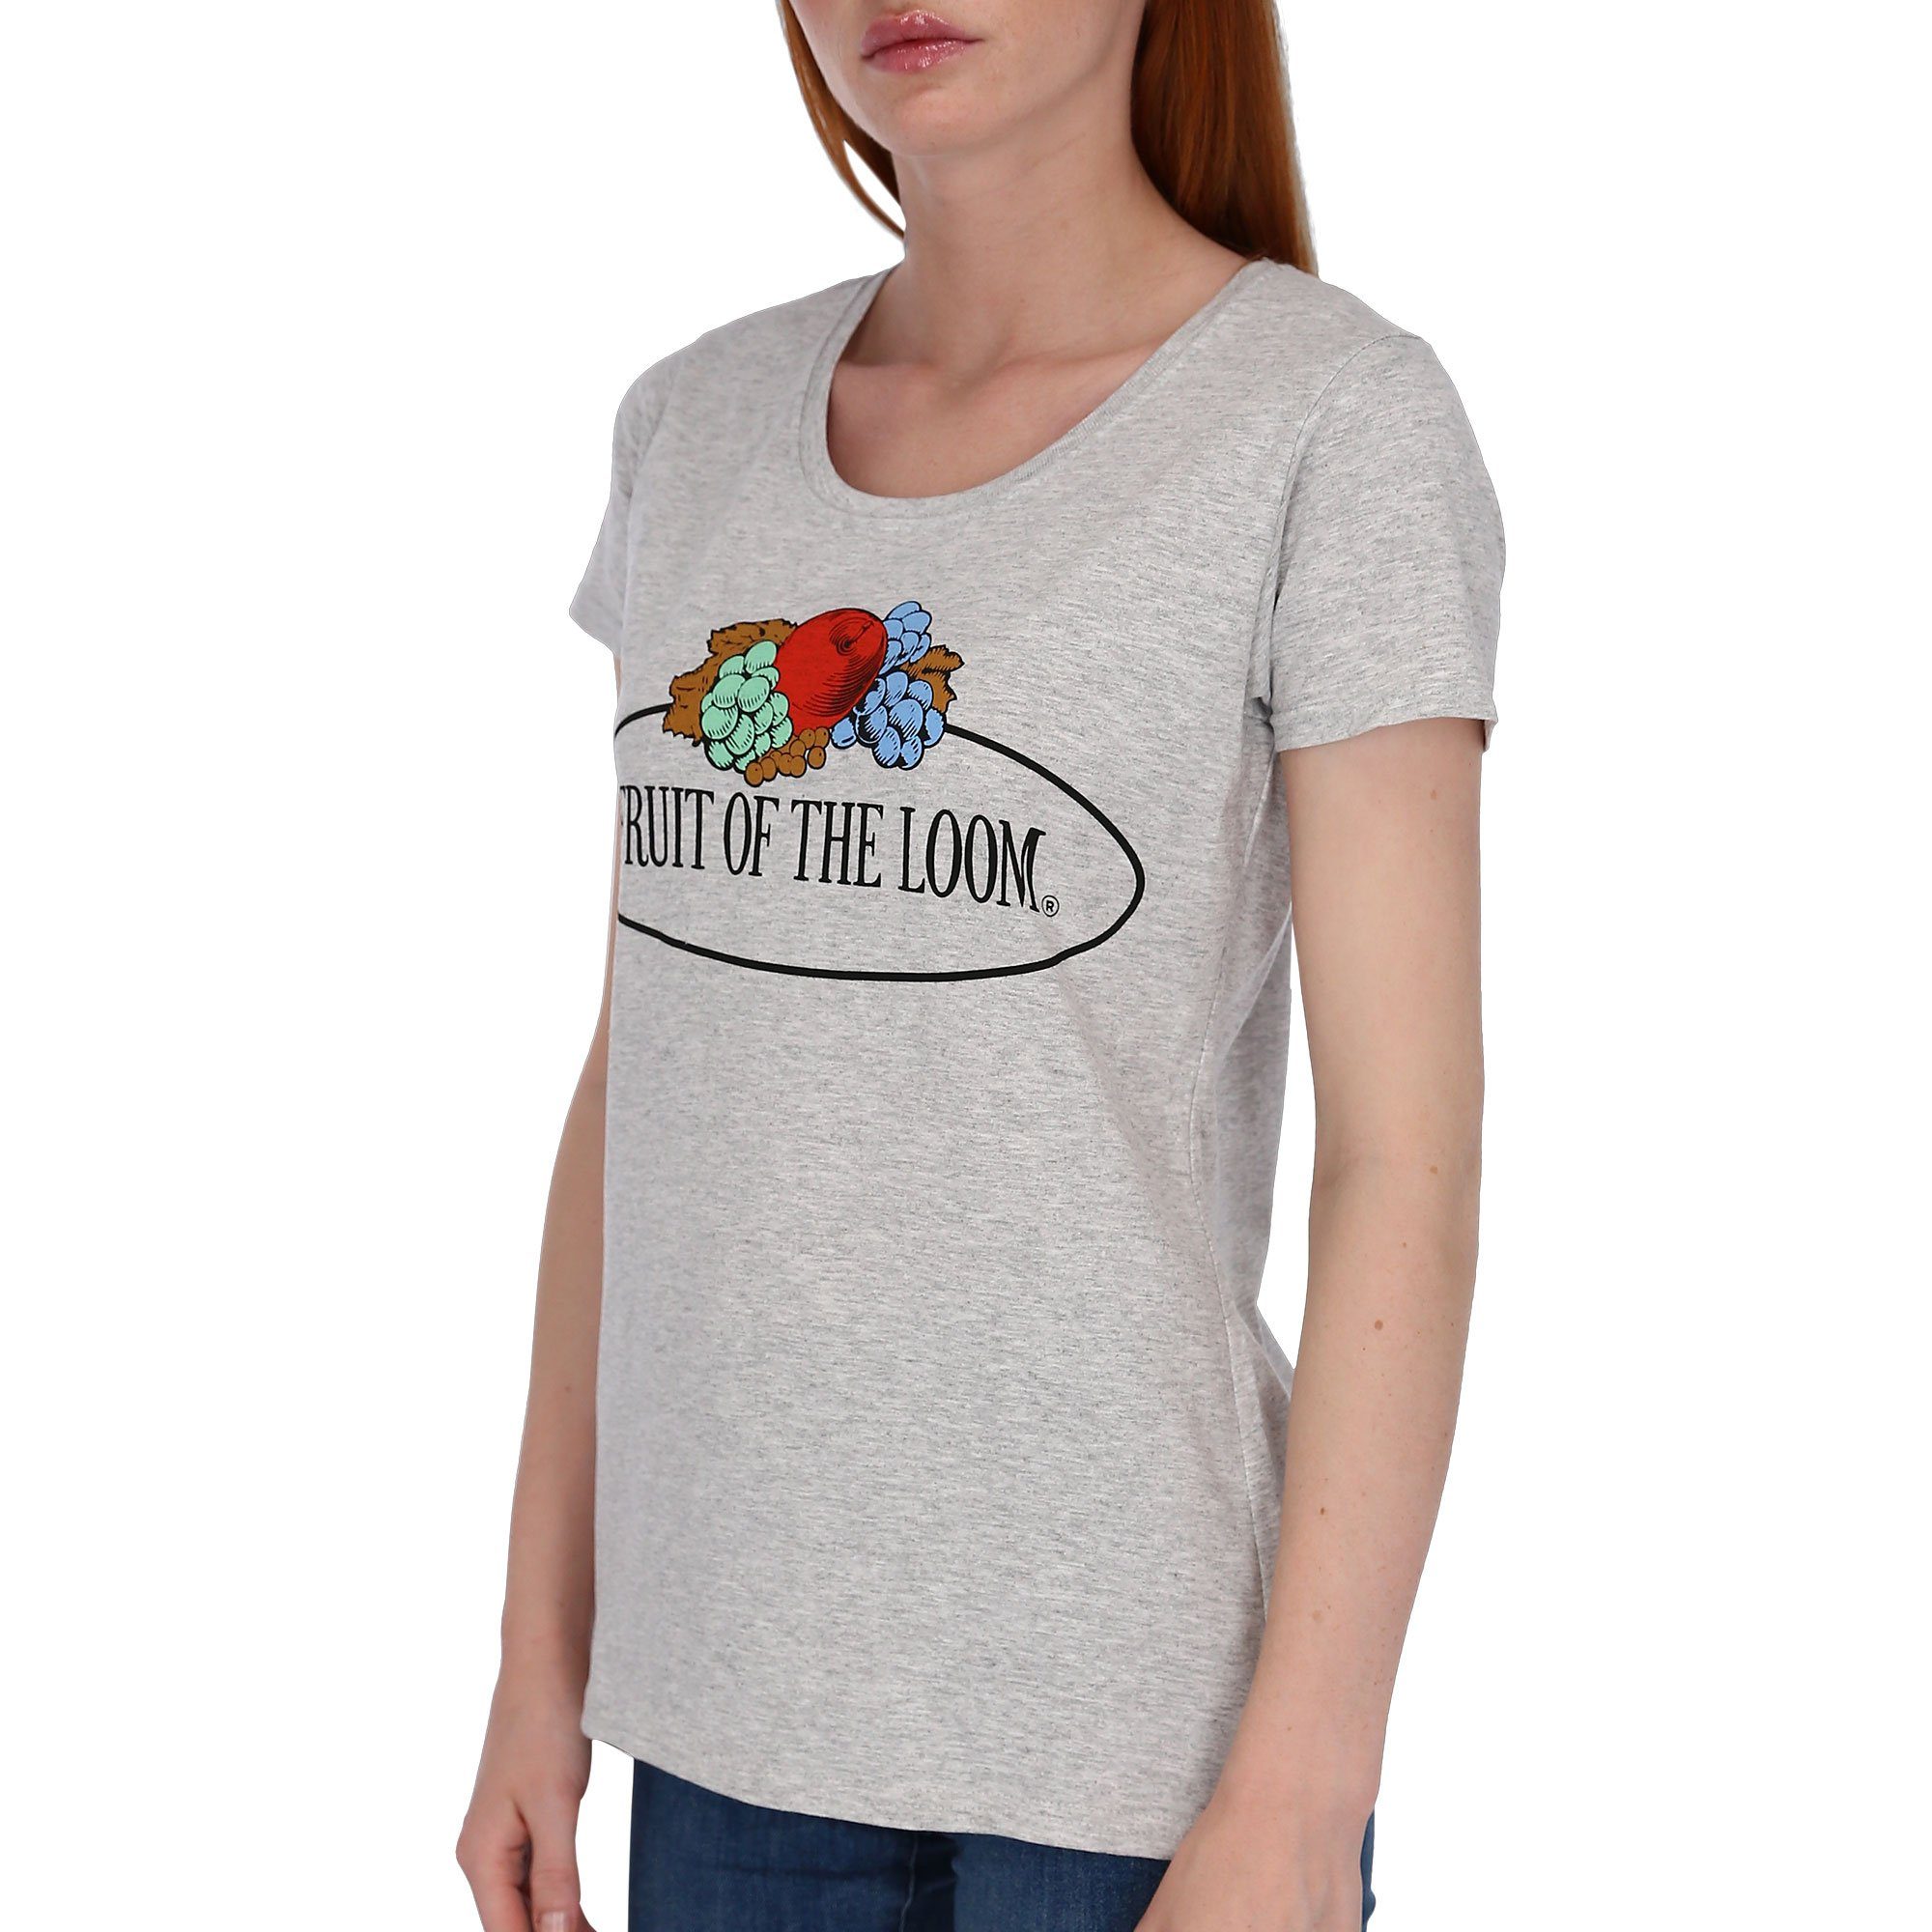 Fruit of the Loom Rundhalsshirt Fruit of the Loom Fruit of the Loom Damen T-Shirt mit Logo graumeliert